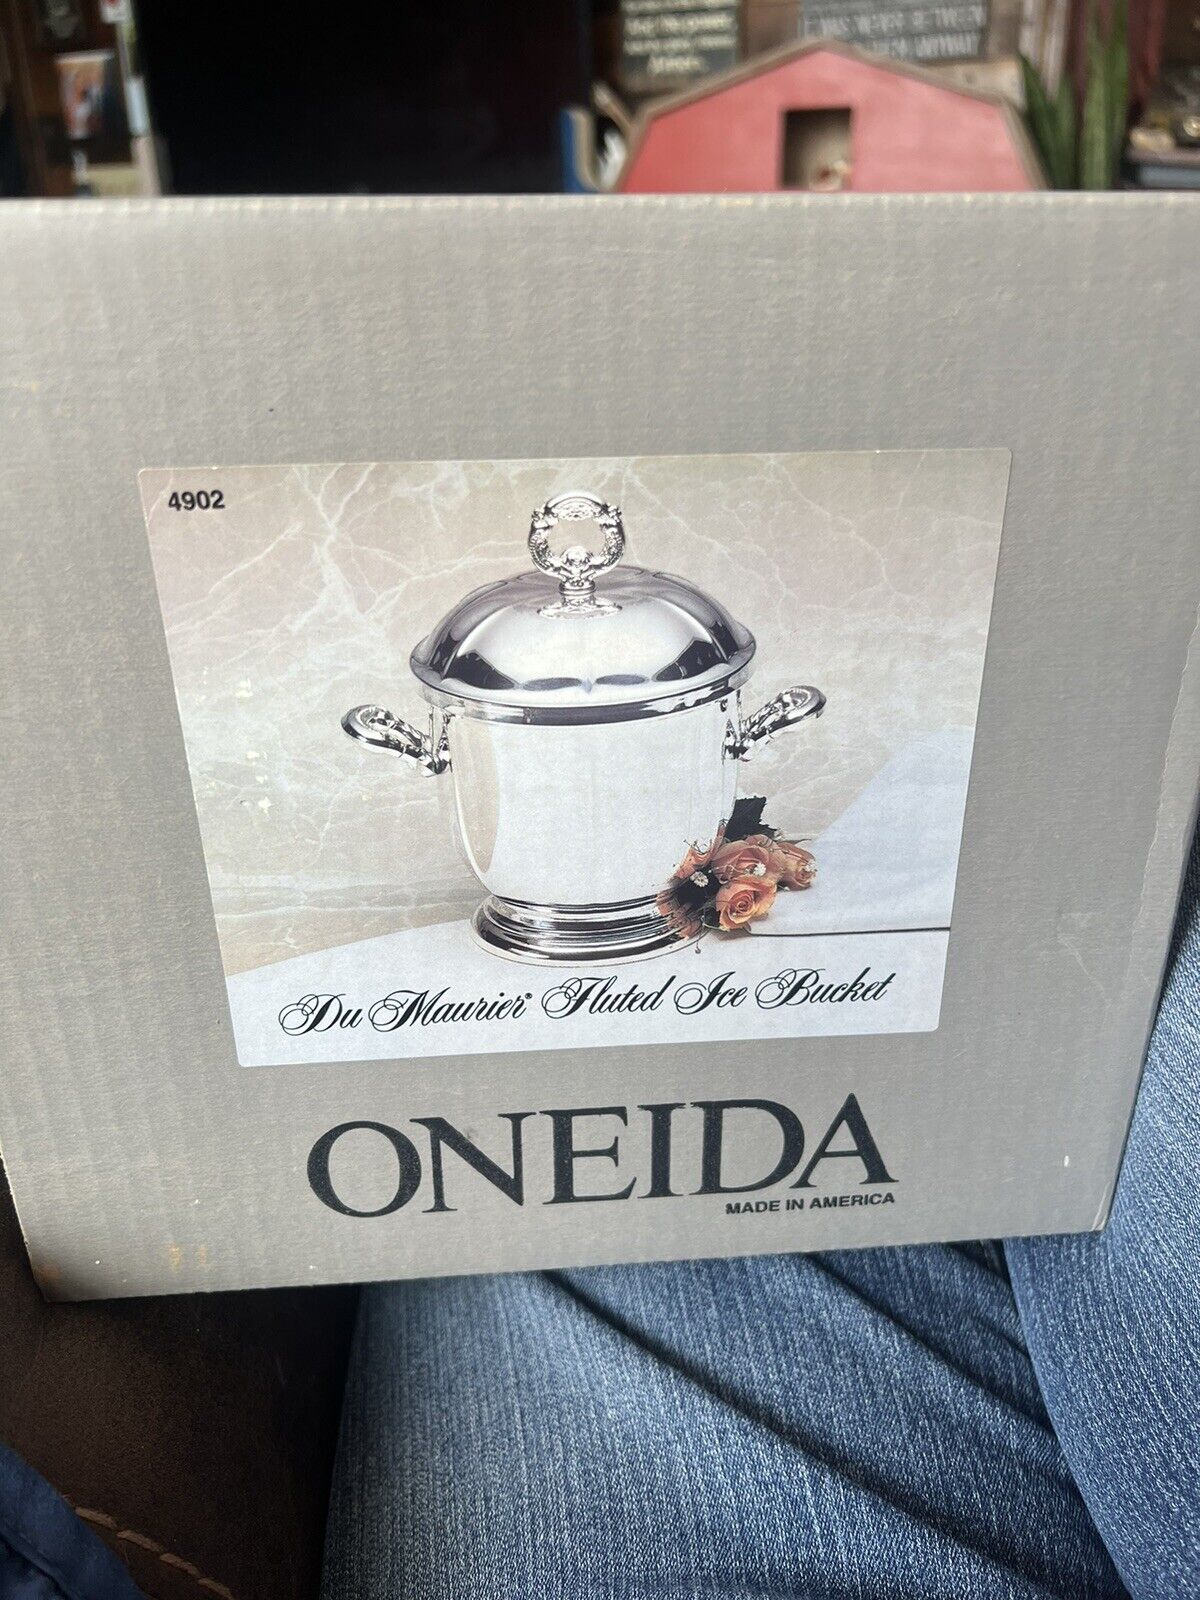 Vintage Oneida Du Maurier Fluted Ice Bucket New In Box From 1994